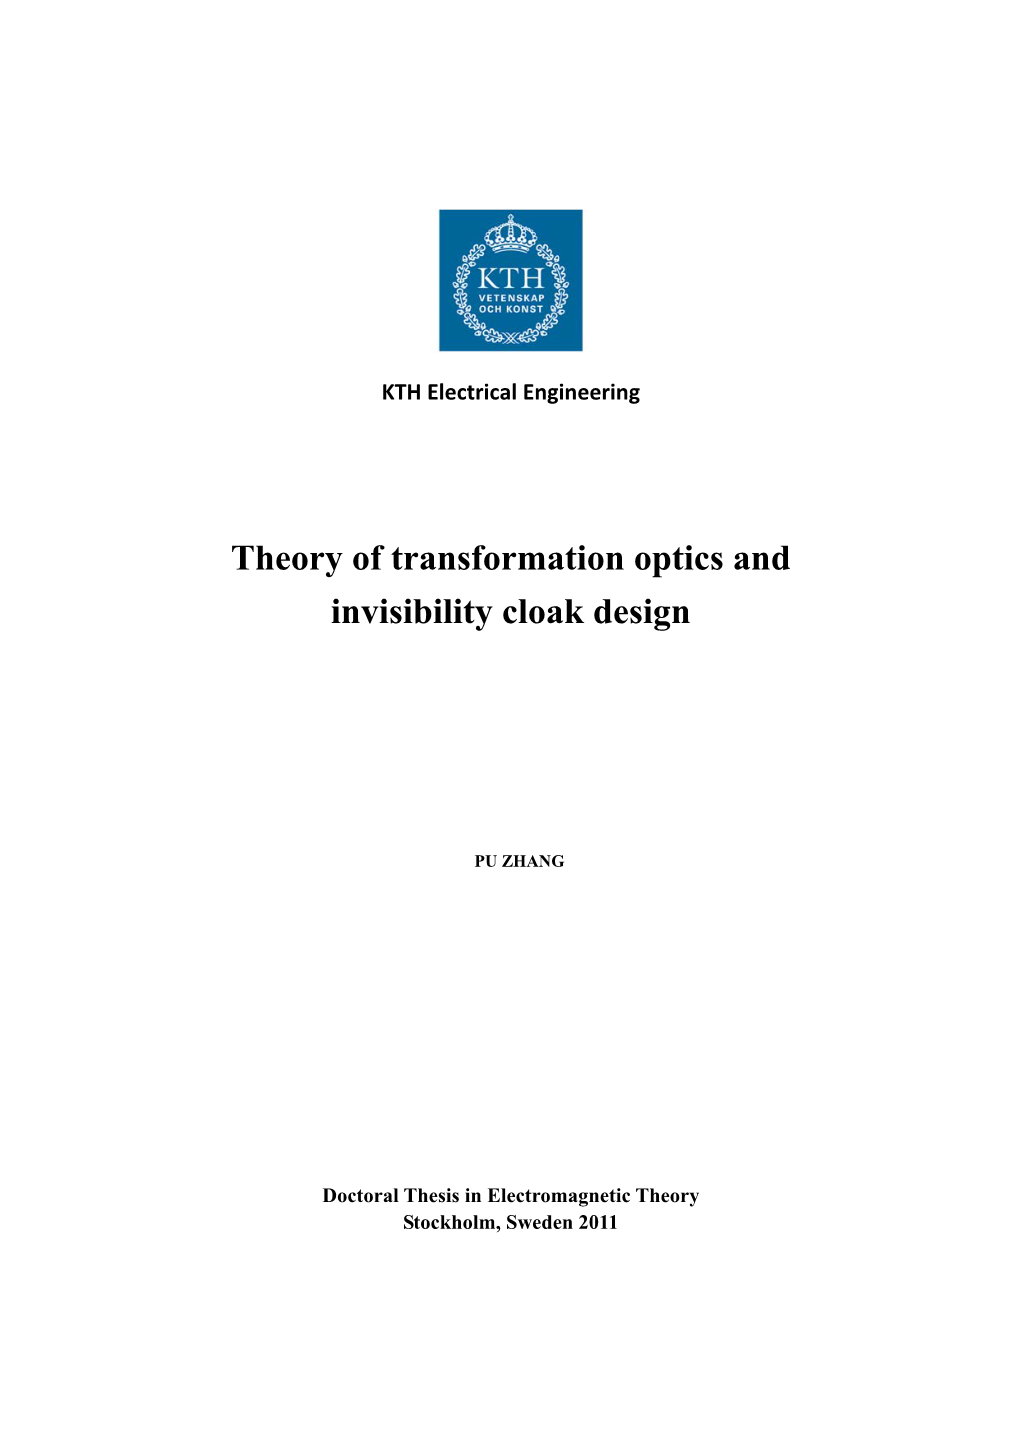 Theory of Transformation Optics and Invisibility Cloak Design